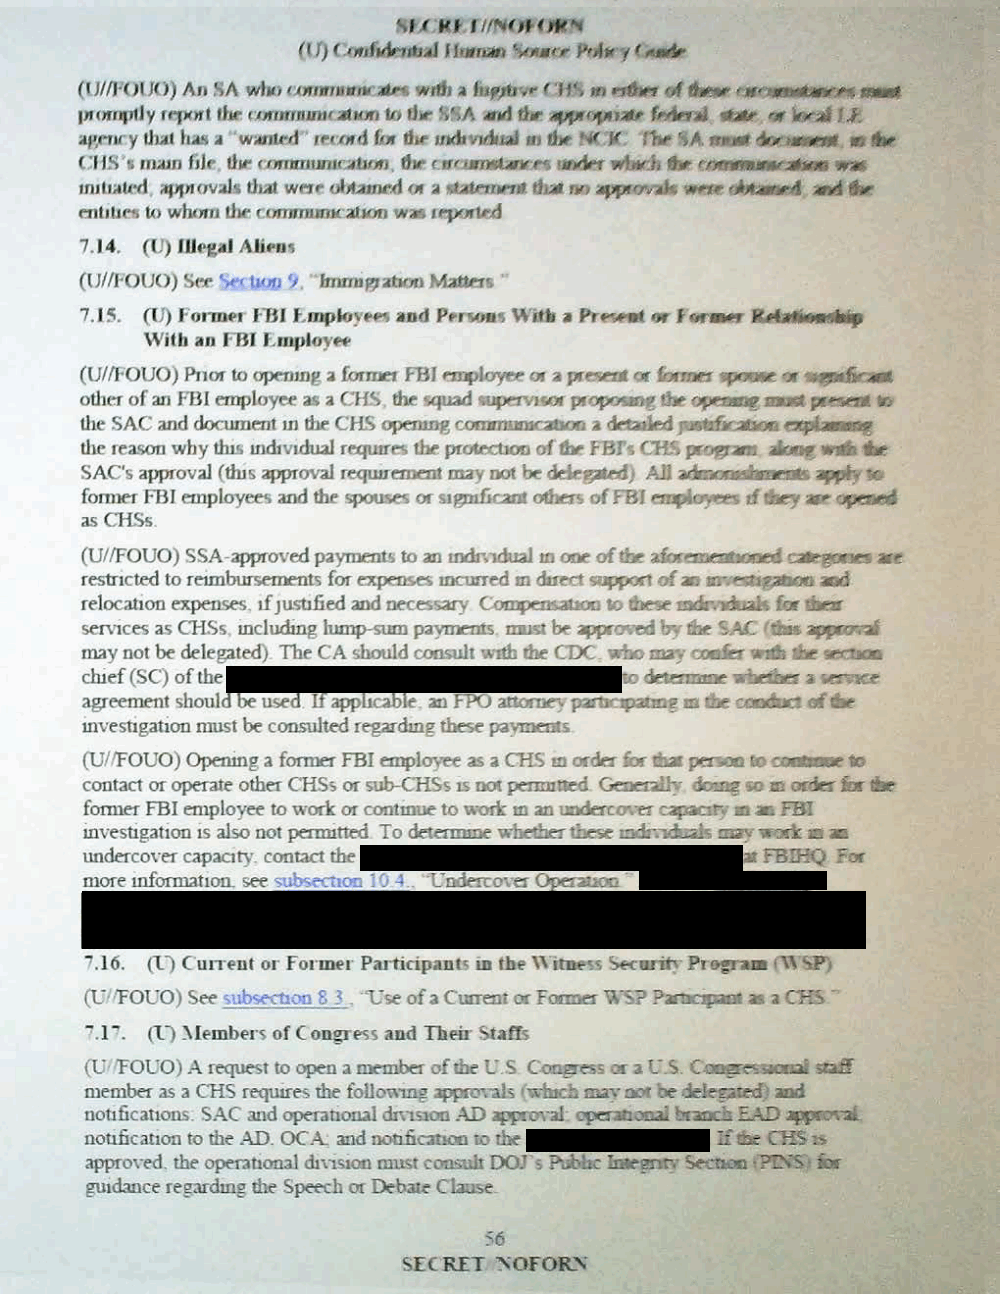 Page 67 from Confidential Human Source Policy Guide